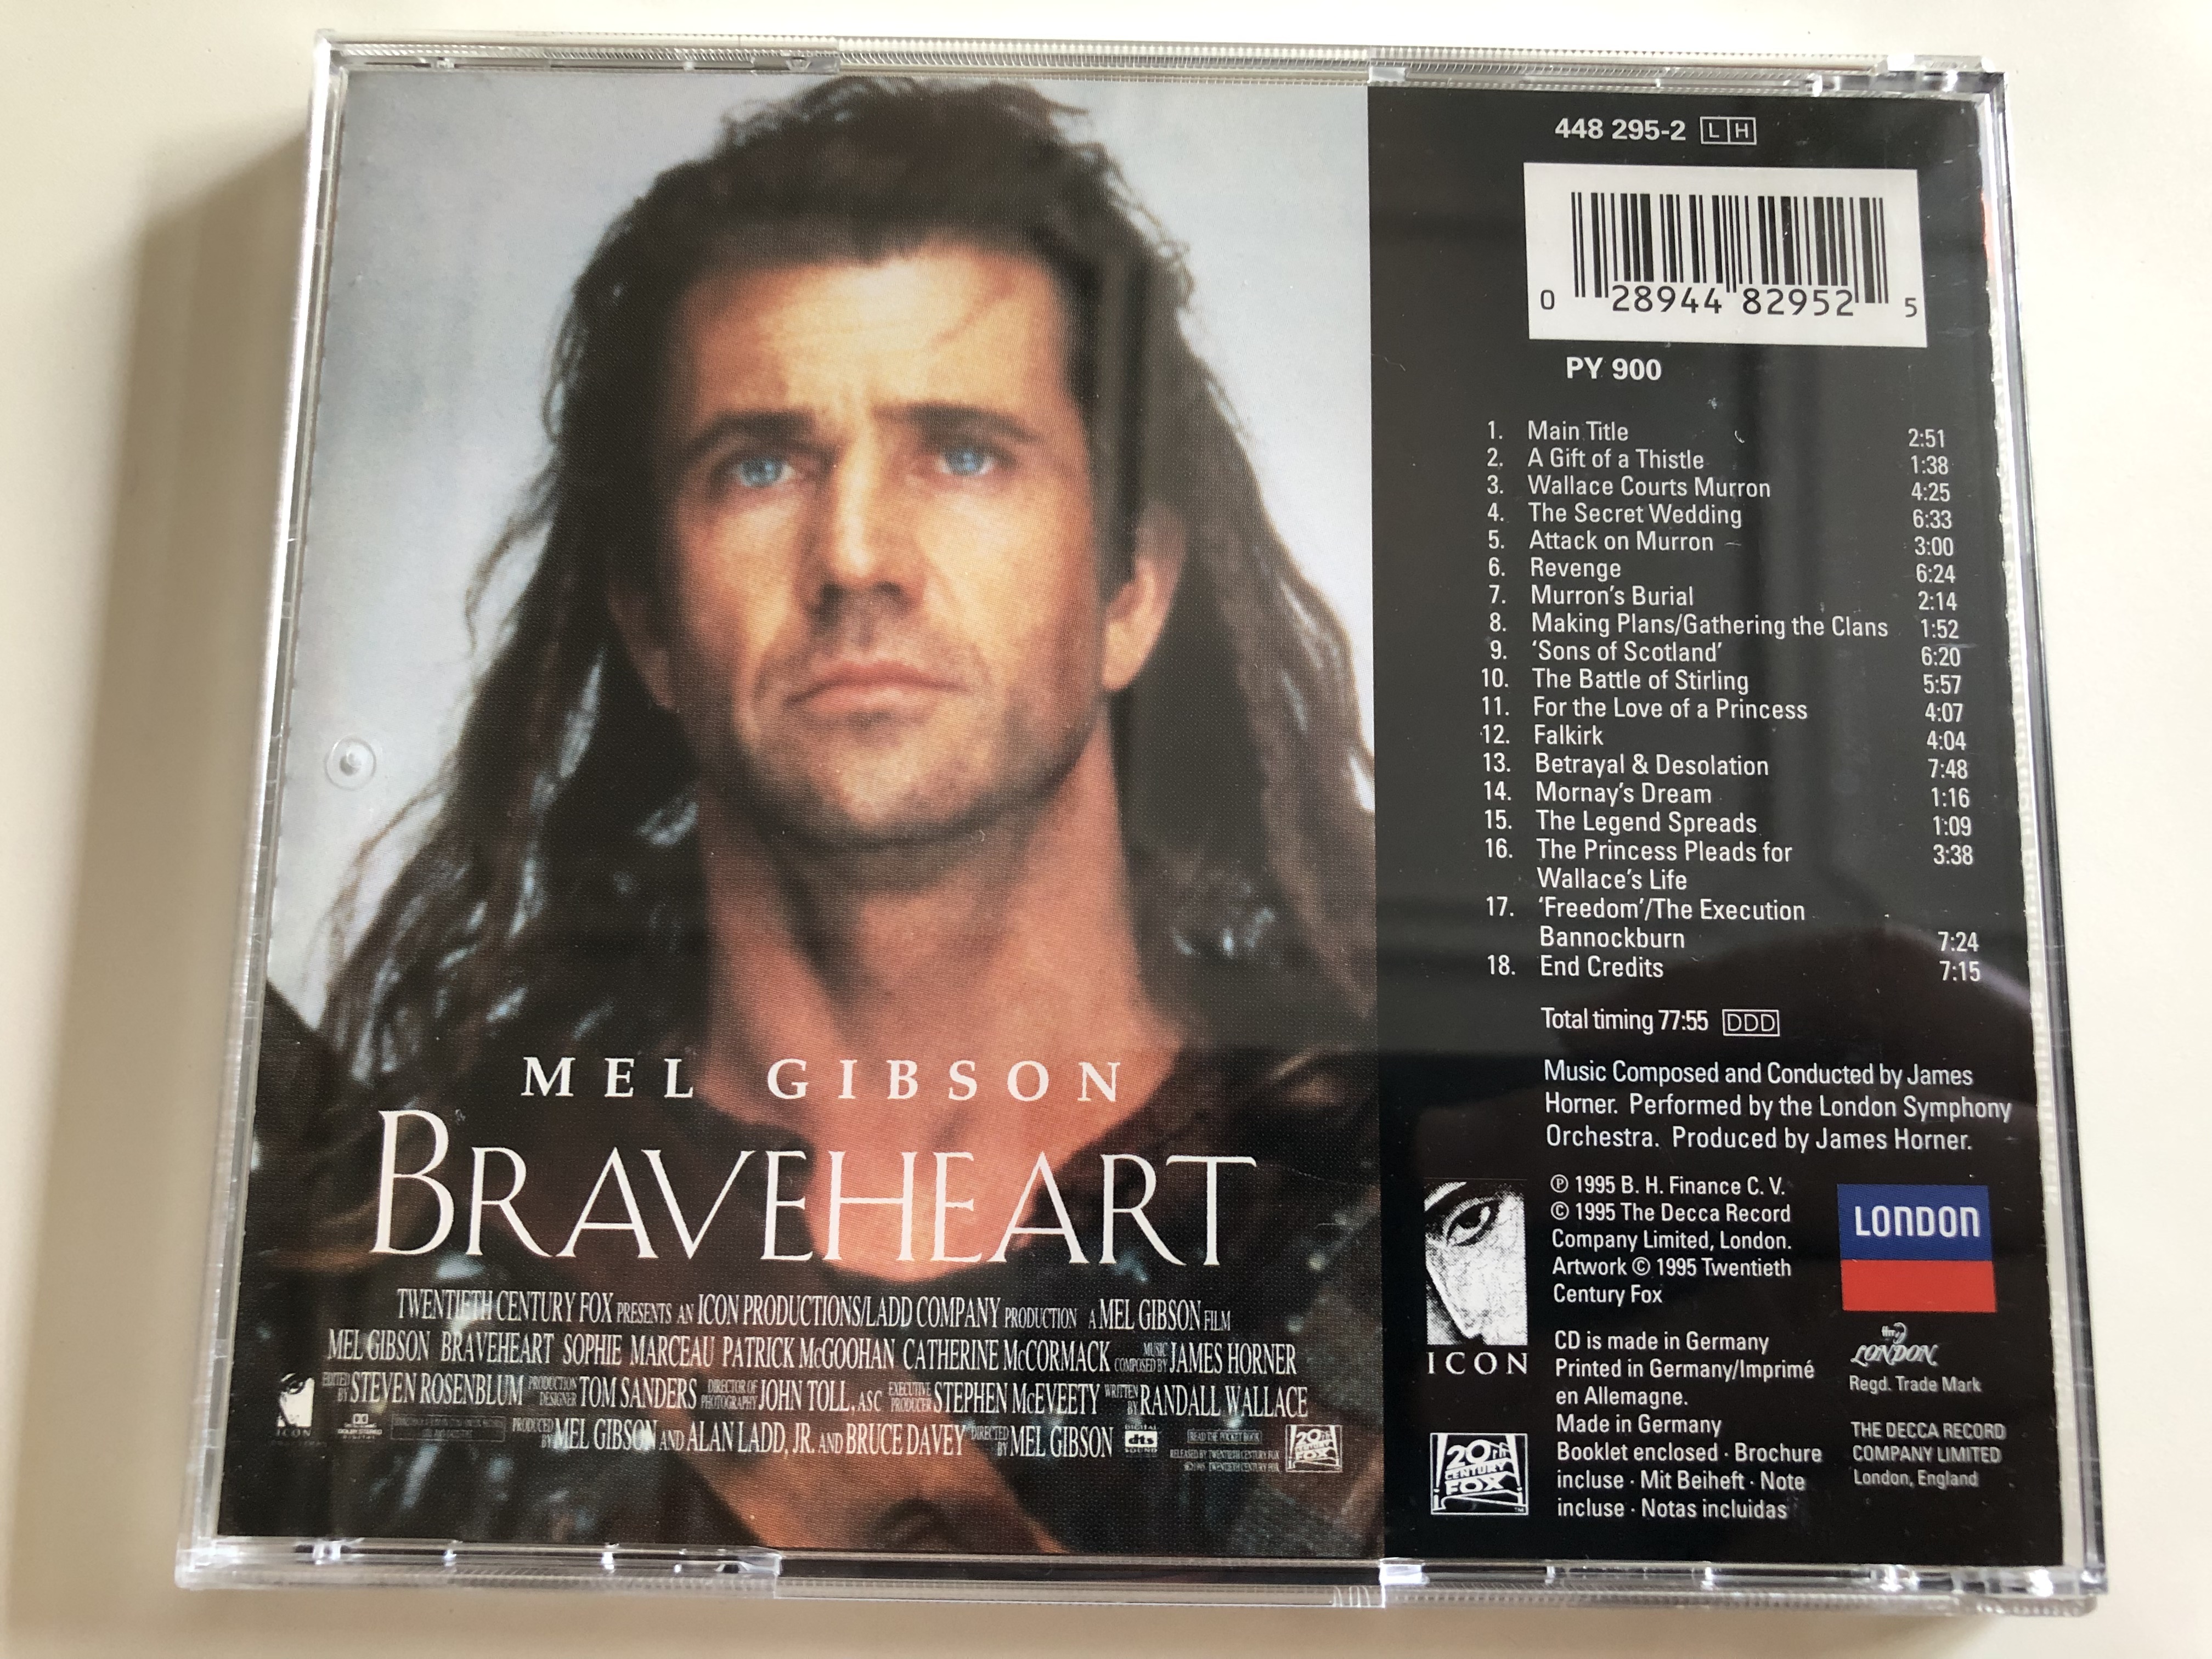 braveheart-original-motion-picture-soundtrack-music-composed-and-conducted-by-james-horner-london-symphony-orchestra-audio-cd-1995-6-.jpg